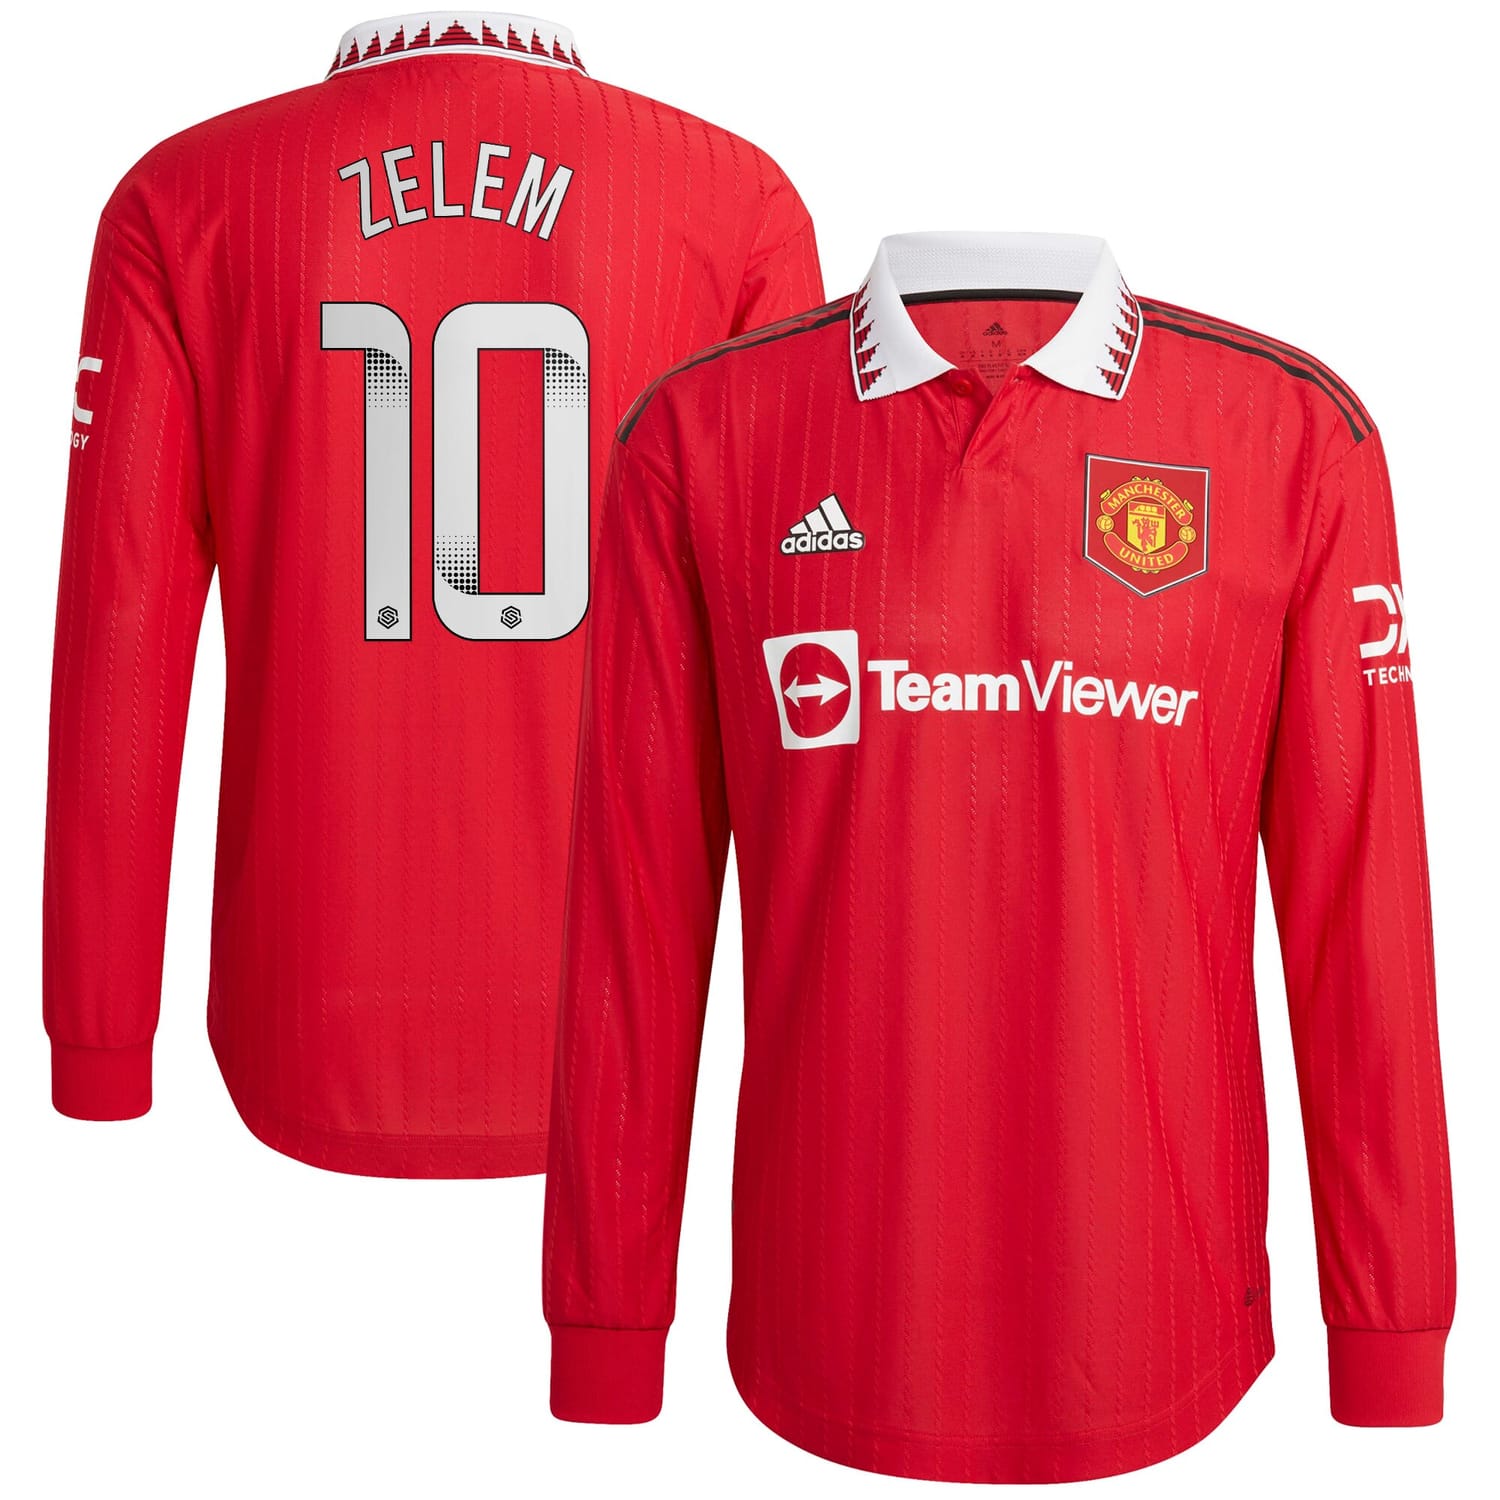 Premier League Manchester United Home WSL Authentic Jersey Shirt Long Sleeve 2022-23 player Katie Zelem 10 printing for Men